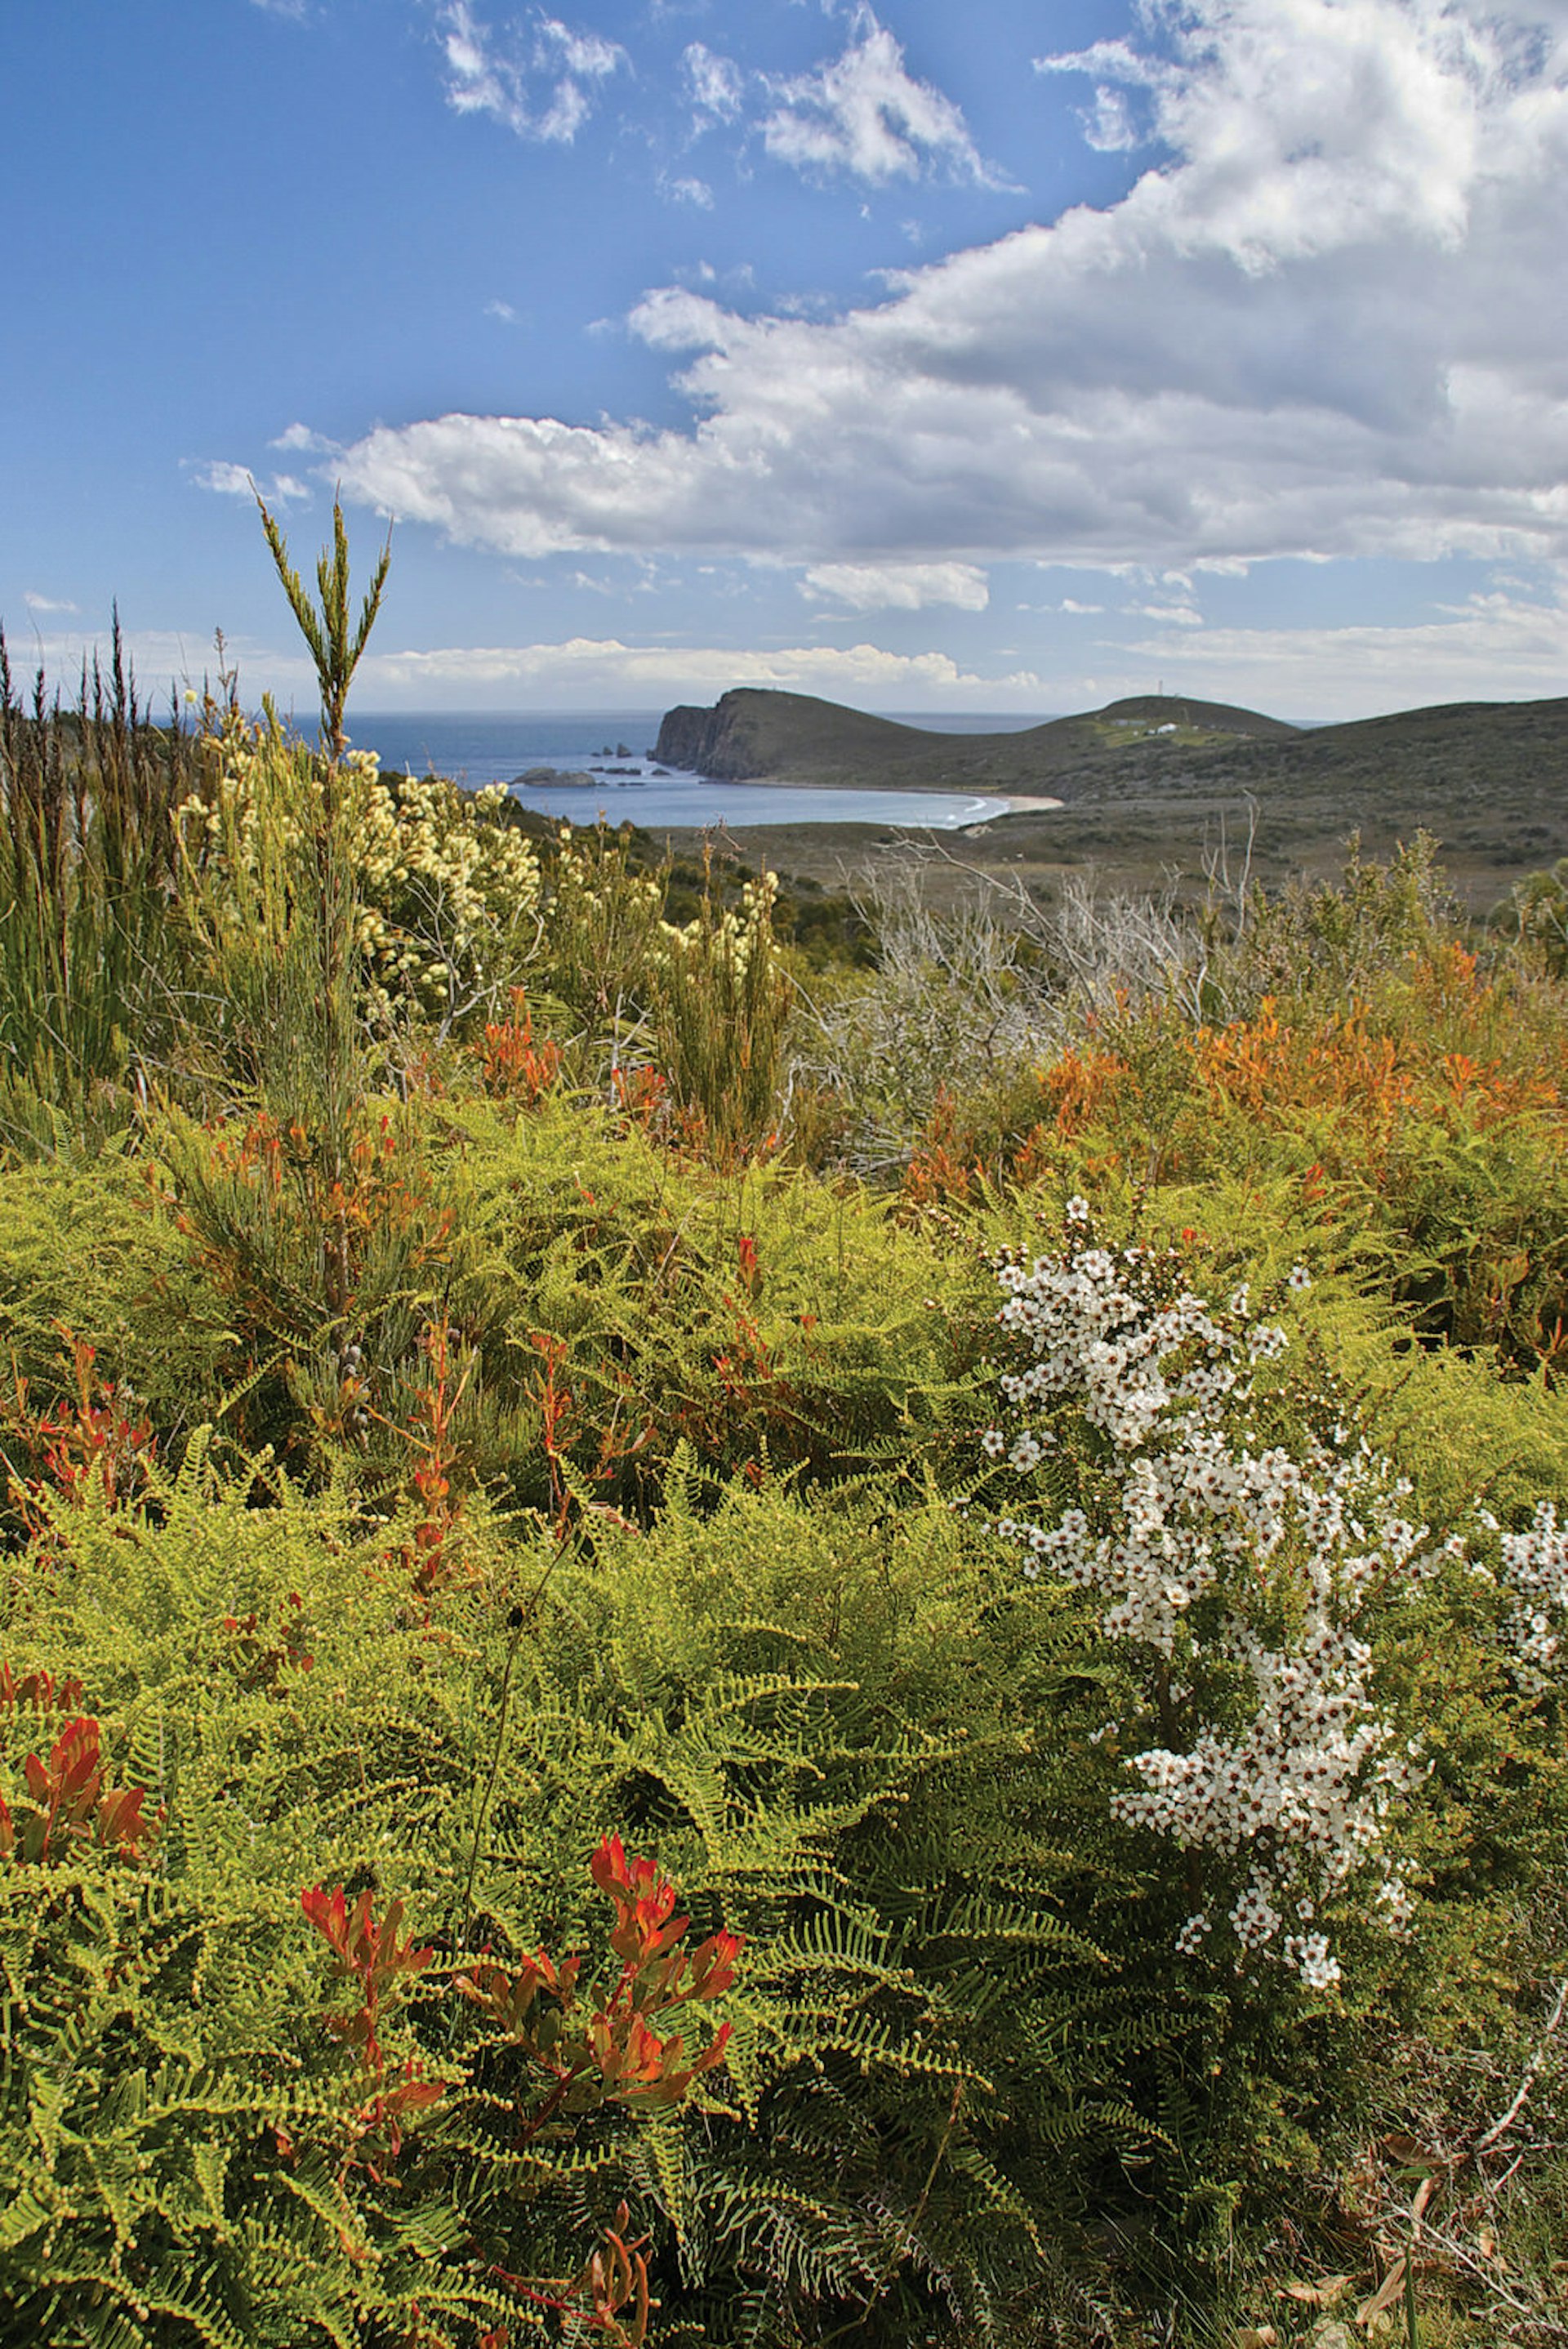 Features - Bruny Island wildflowers